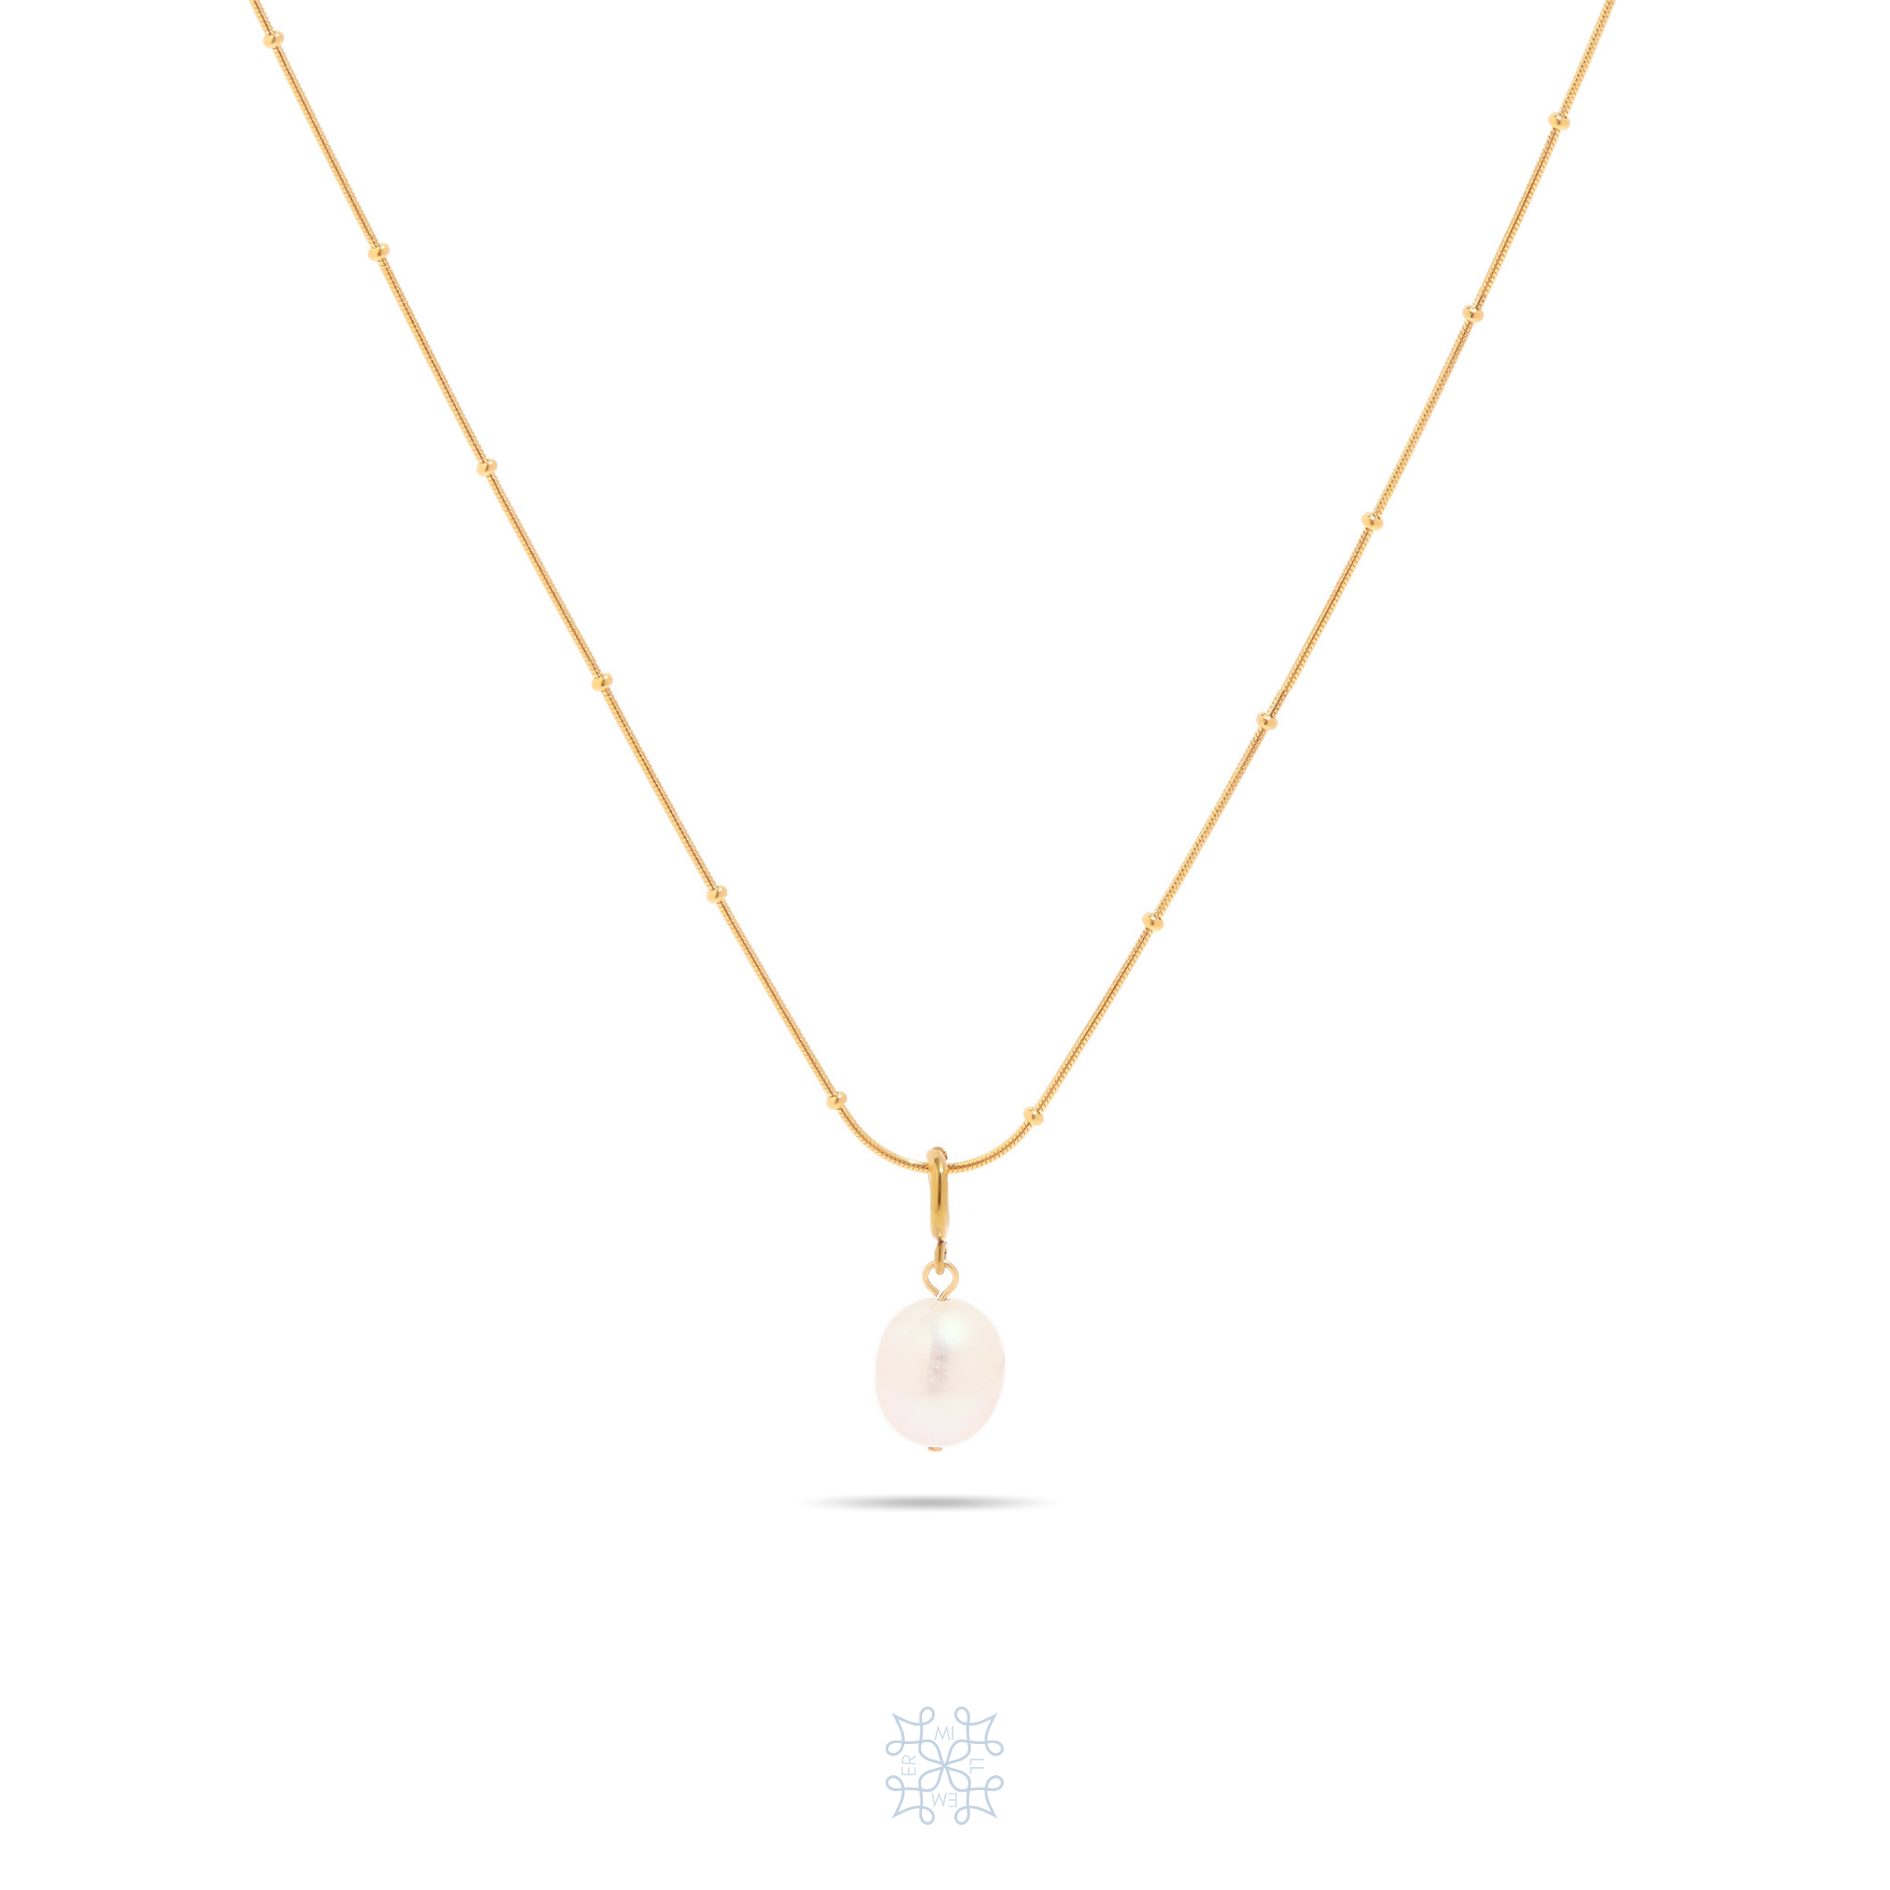 Gold chain necklace with a white pearl pendant. The chain is a dainty beaded gold waterproof chain.